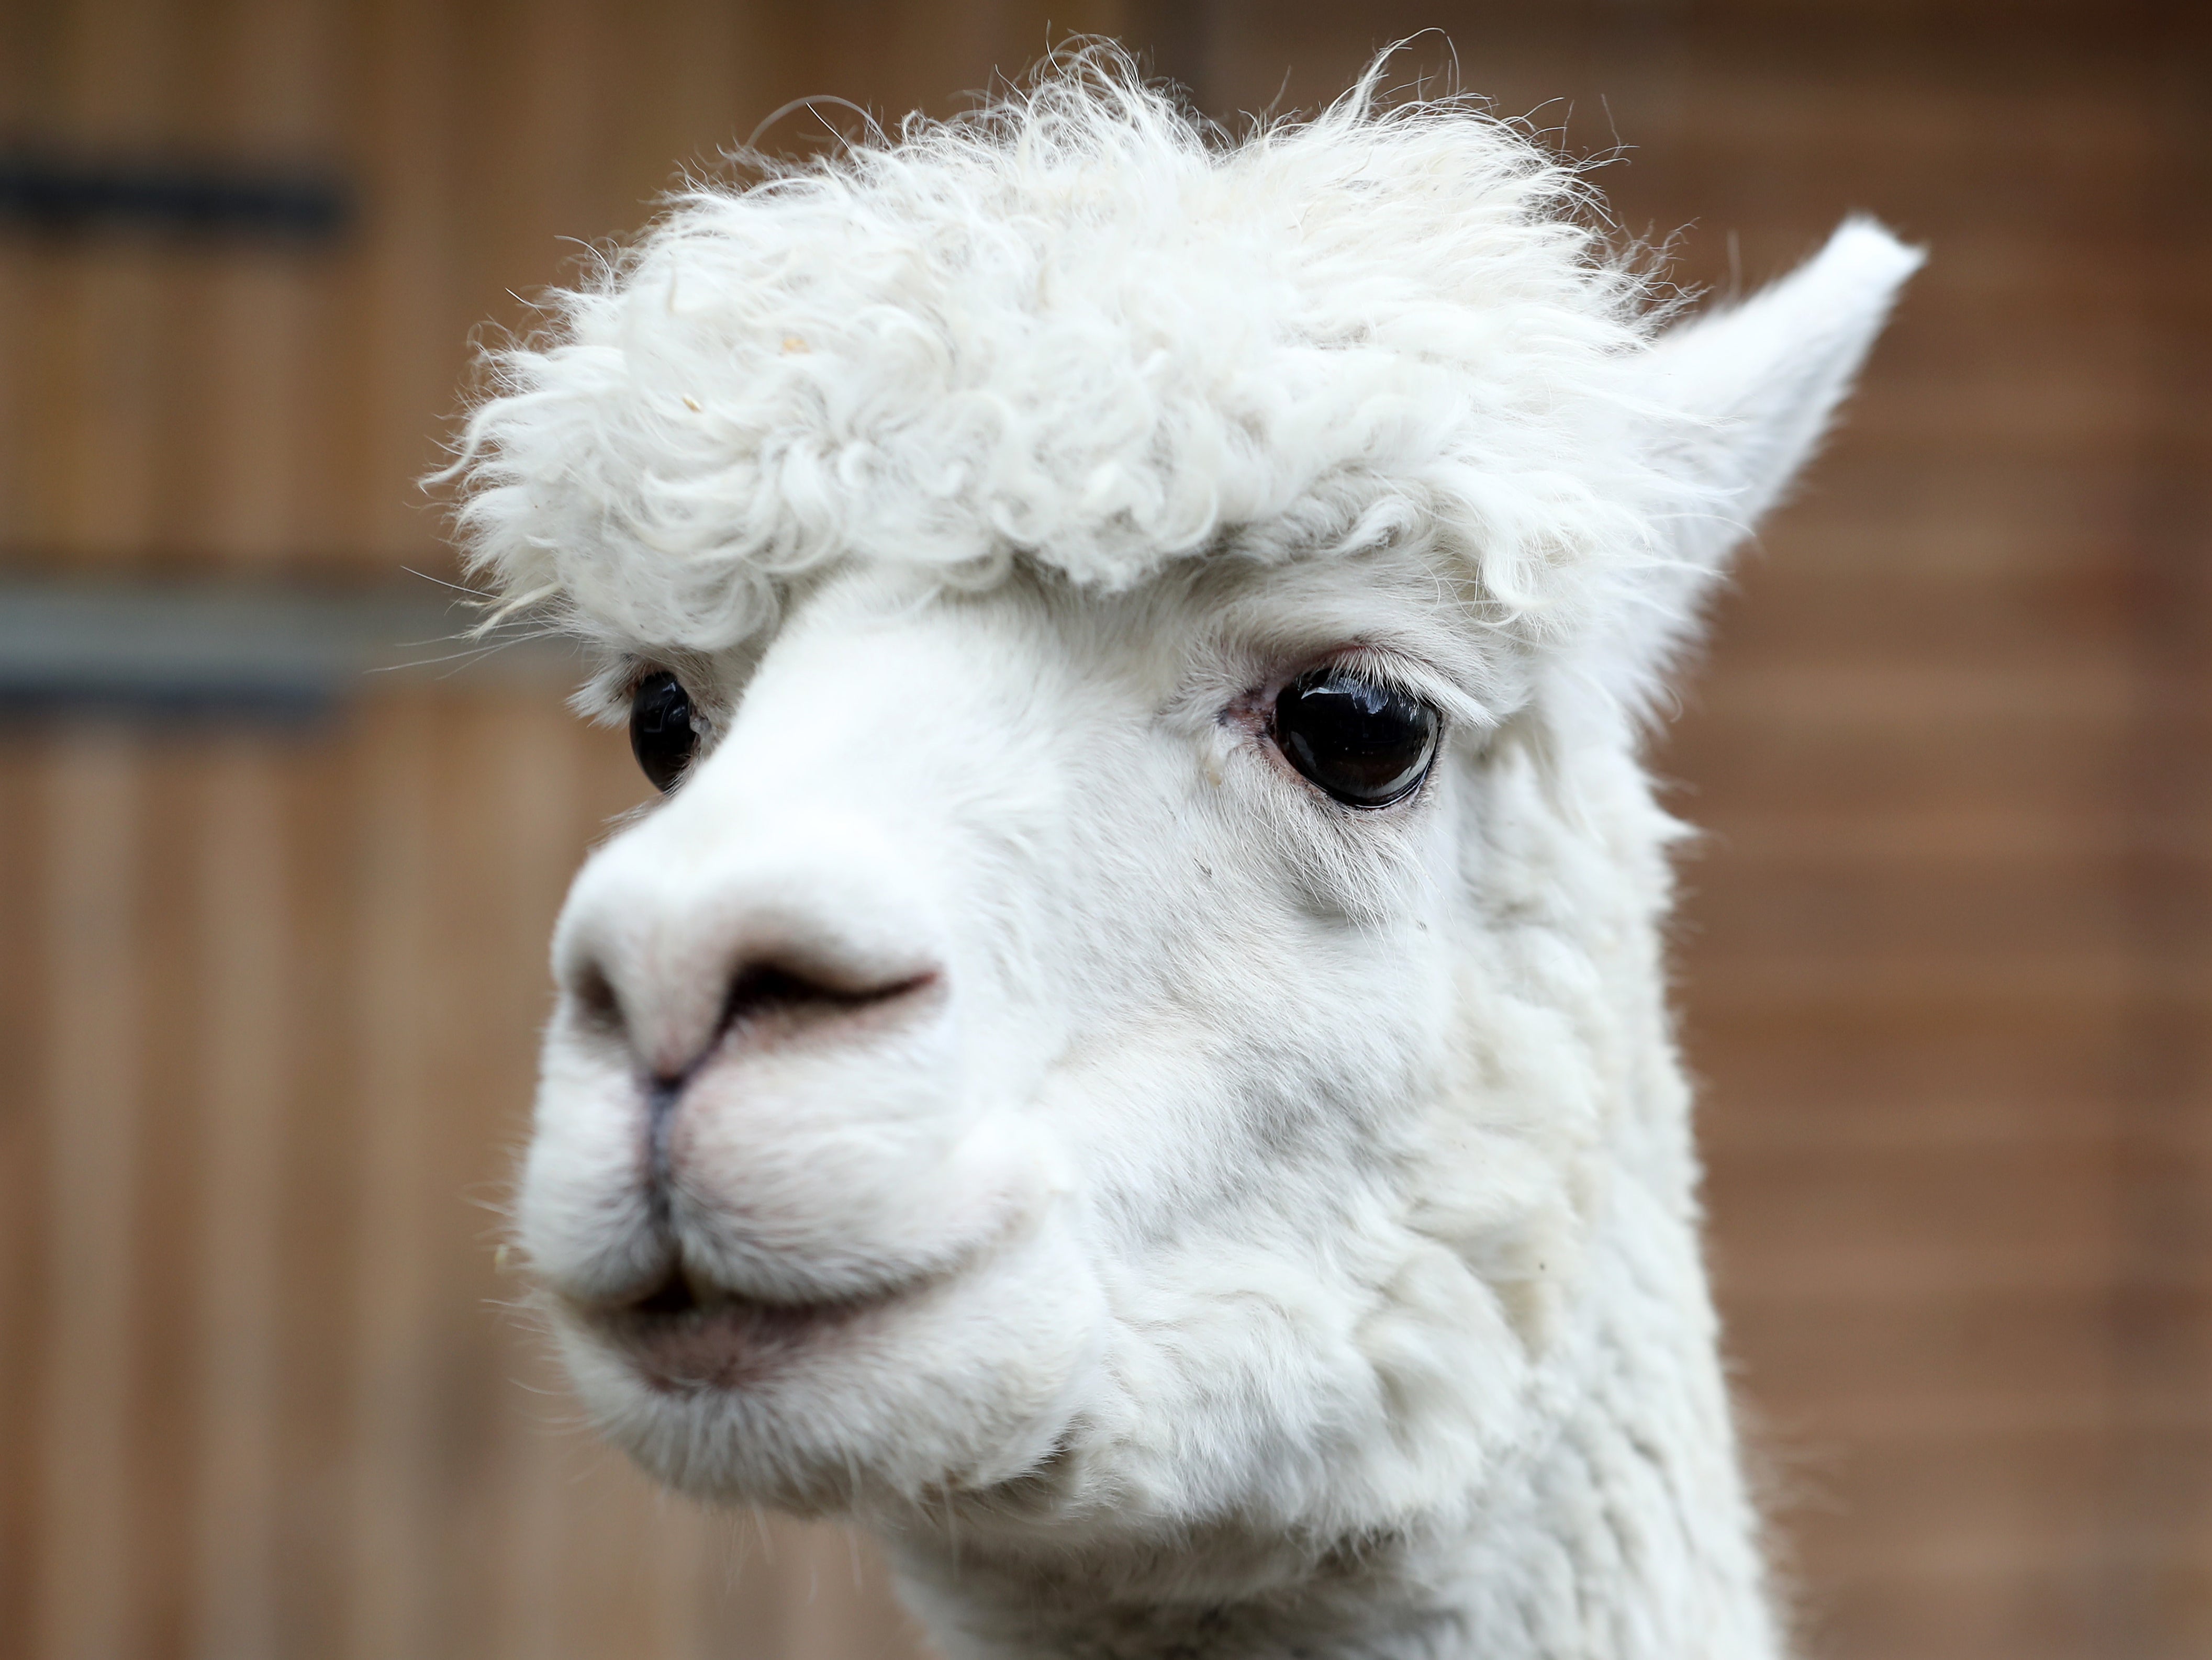 A new nasal spray is in talks to be produced, with its ingredients to include nanobodies produced by llamas and camels